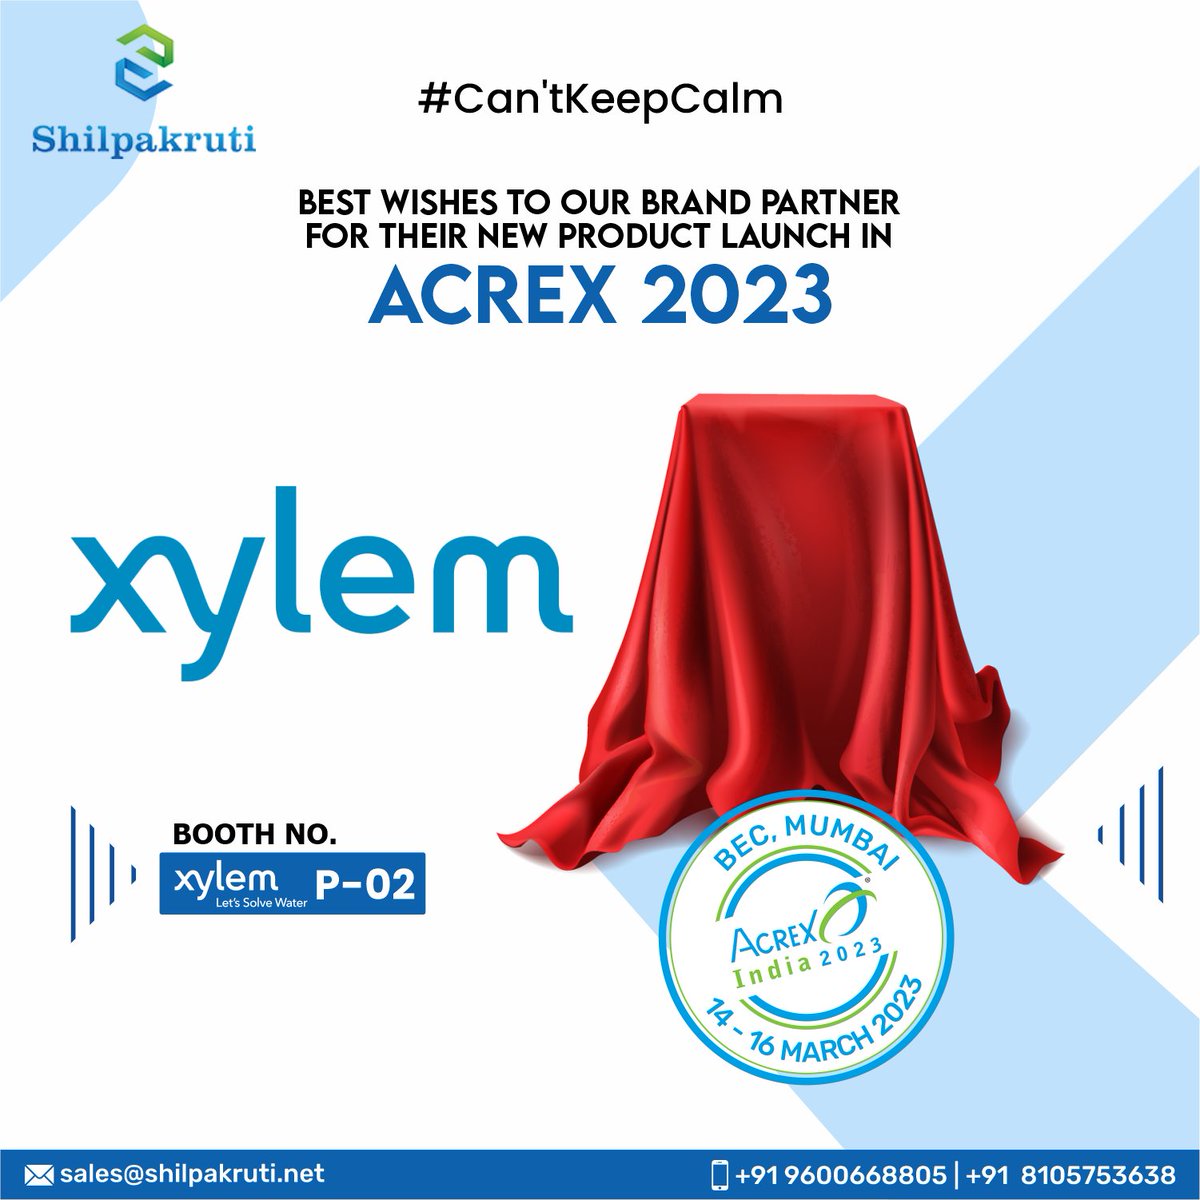 We are super excited for Our Brand Partner Xylem on their surprise Product Launch happening TODAY in ACREX 2023. 
Do visit our Brand Partner’s Xylem at Booth No. P-02 to unveil the surprise product.
#hvac #hvacengineer #hvacservice #acrex #acrex2023 #ishrae #ashrae #b2bmarketing